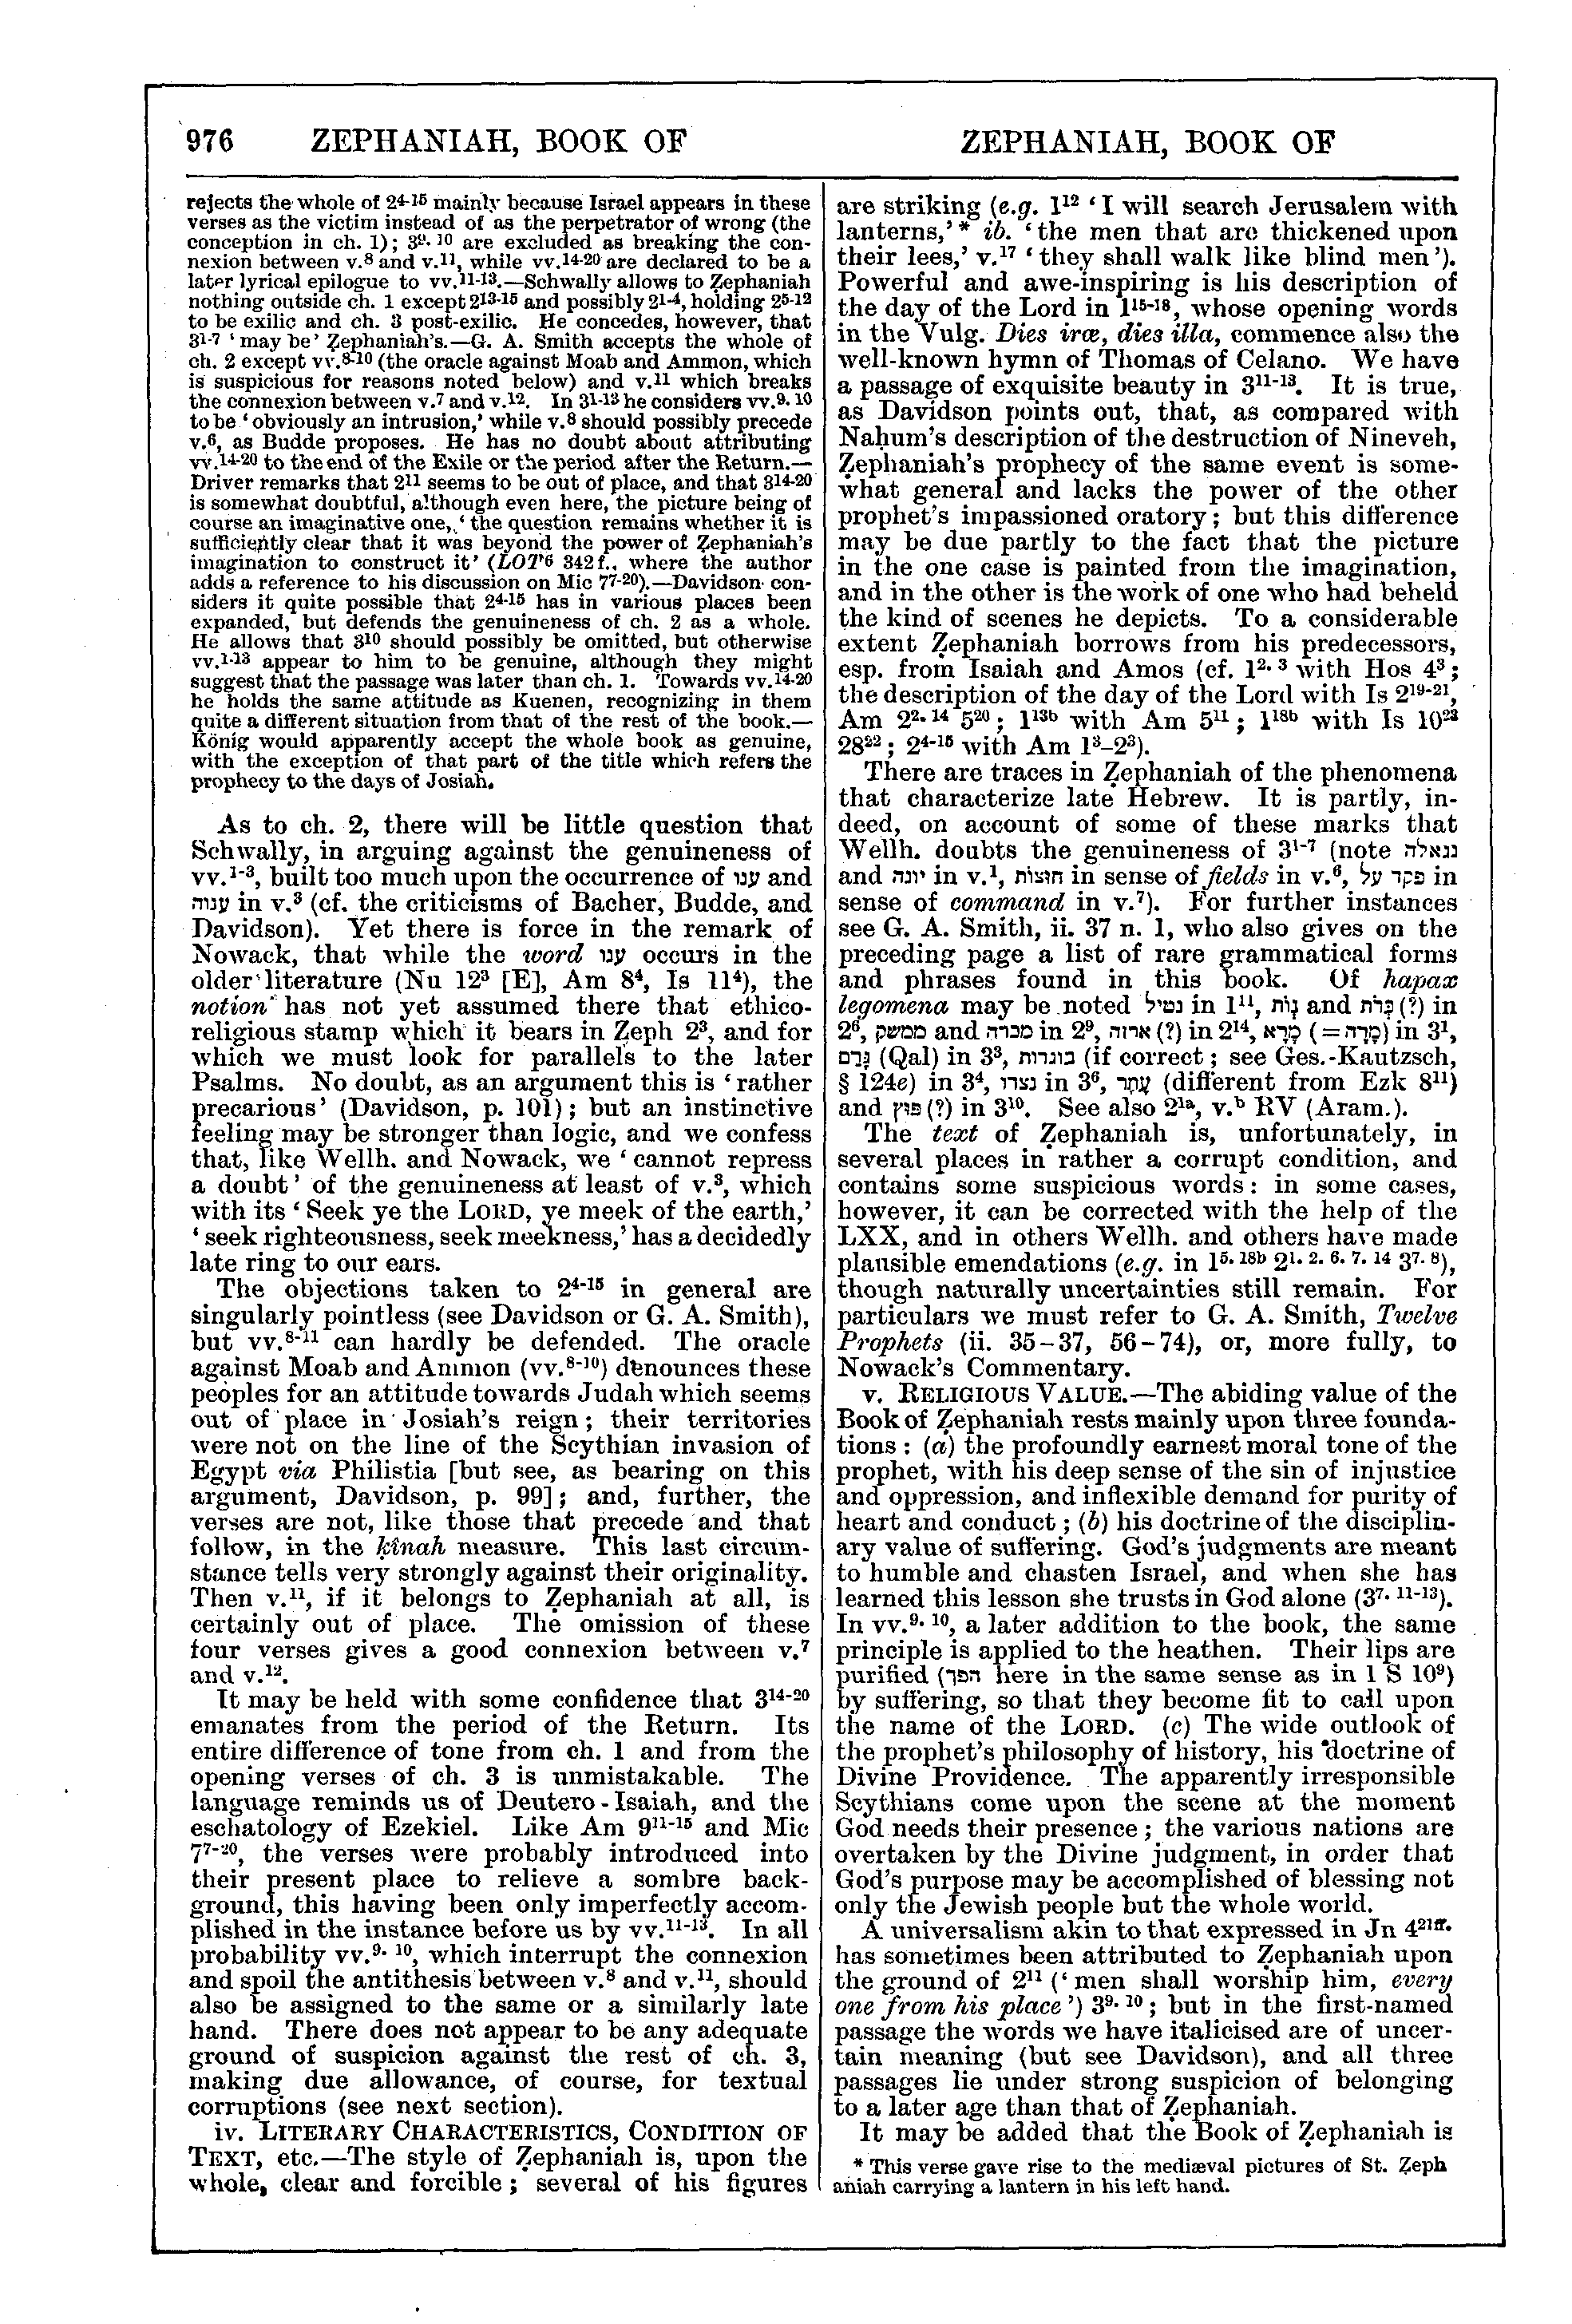 Image of page 976